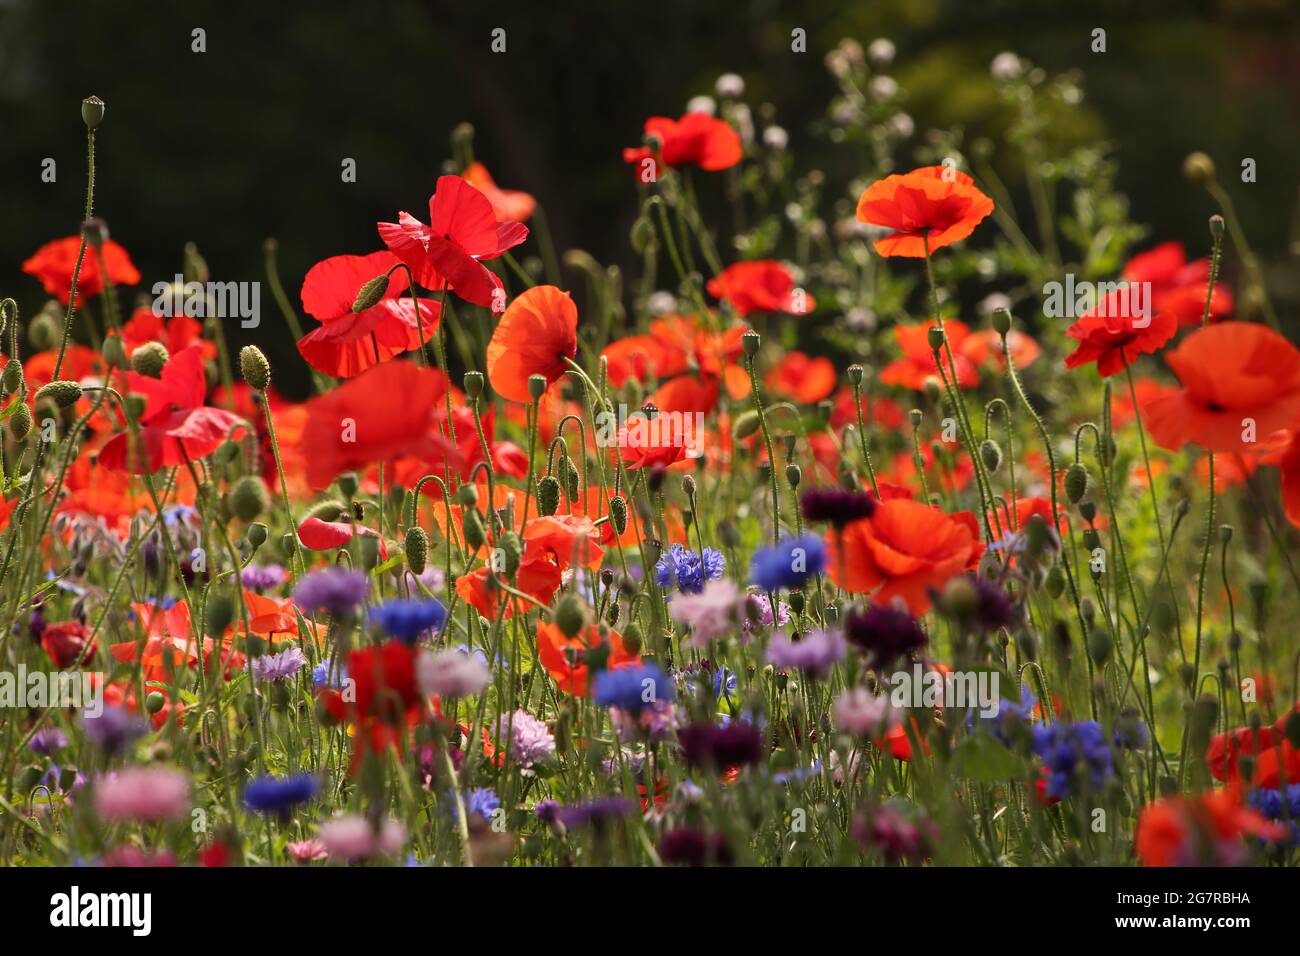 Close up of beautiful poppies and other wild flowers. Buds and flowers of spring. Natural green vegetation in the background. Stock Photo